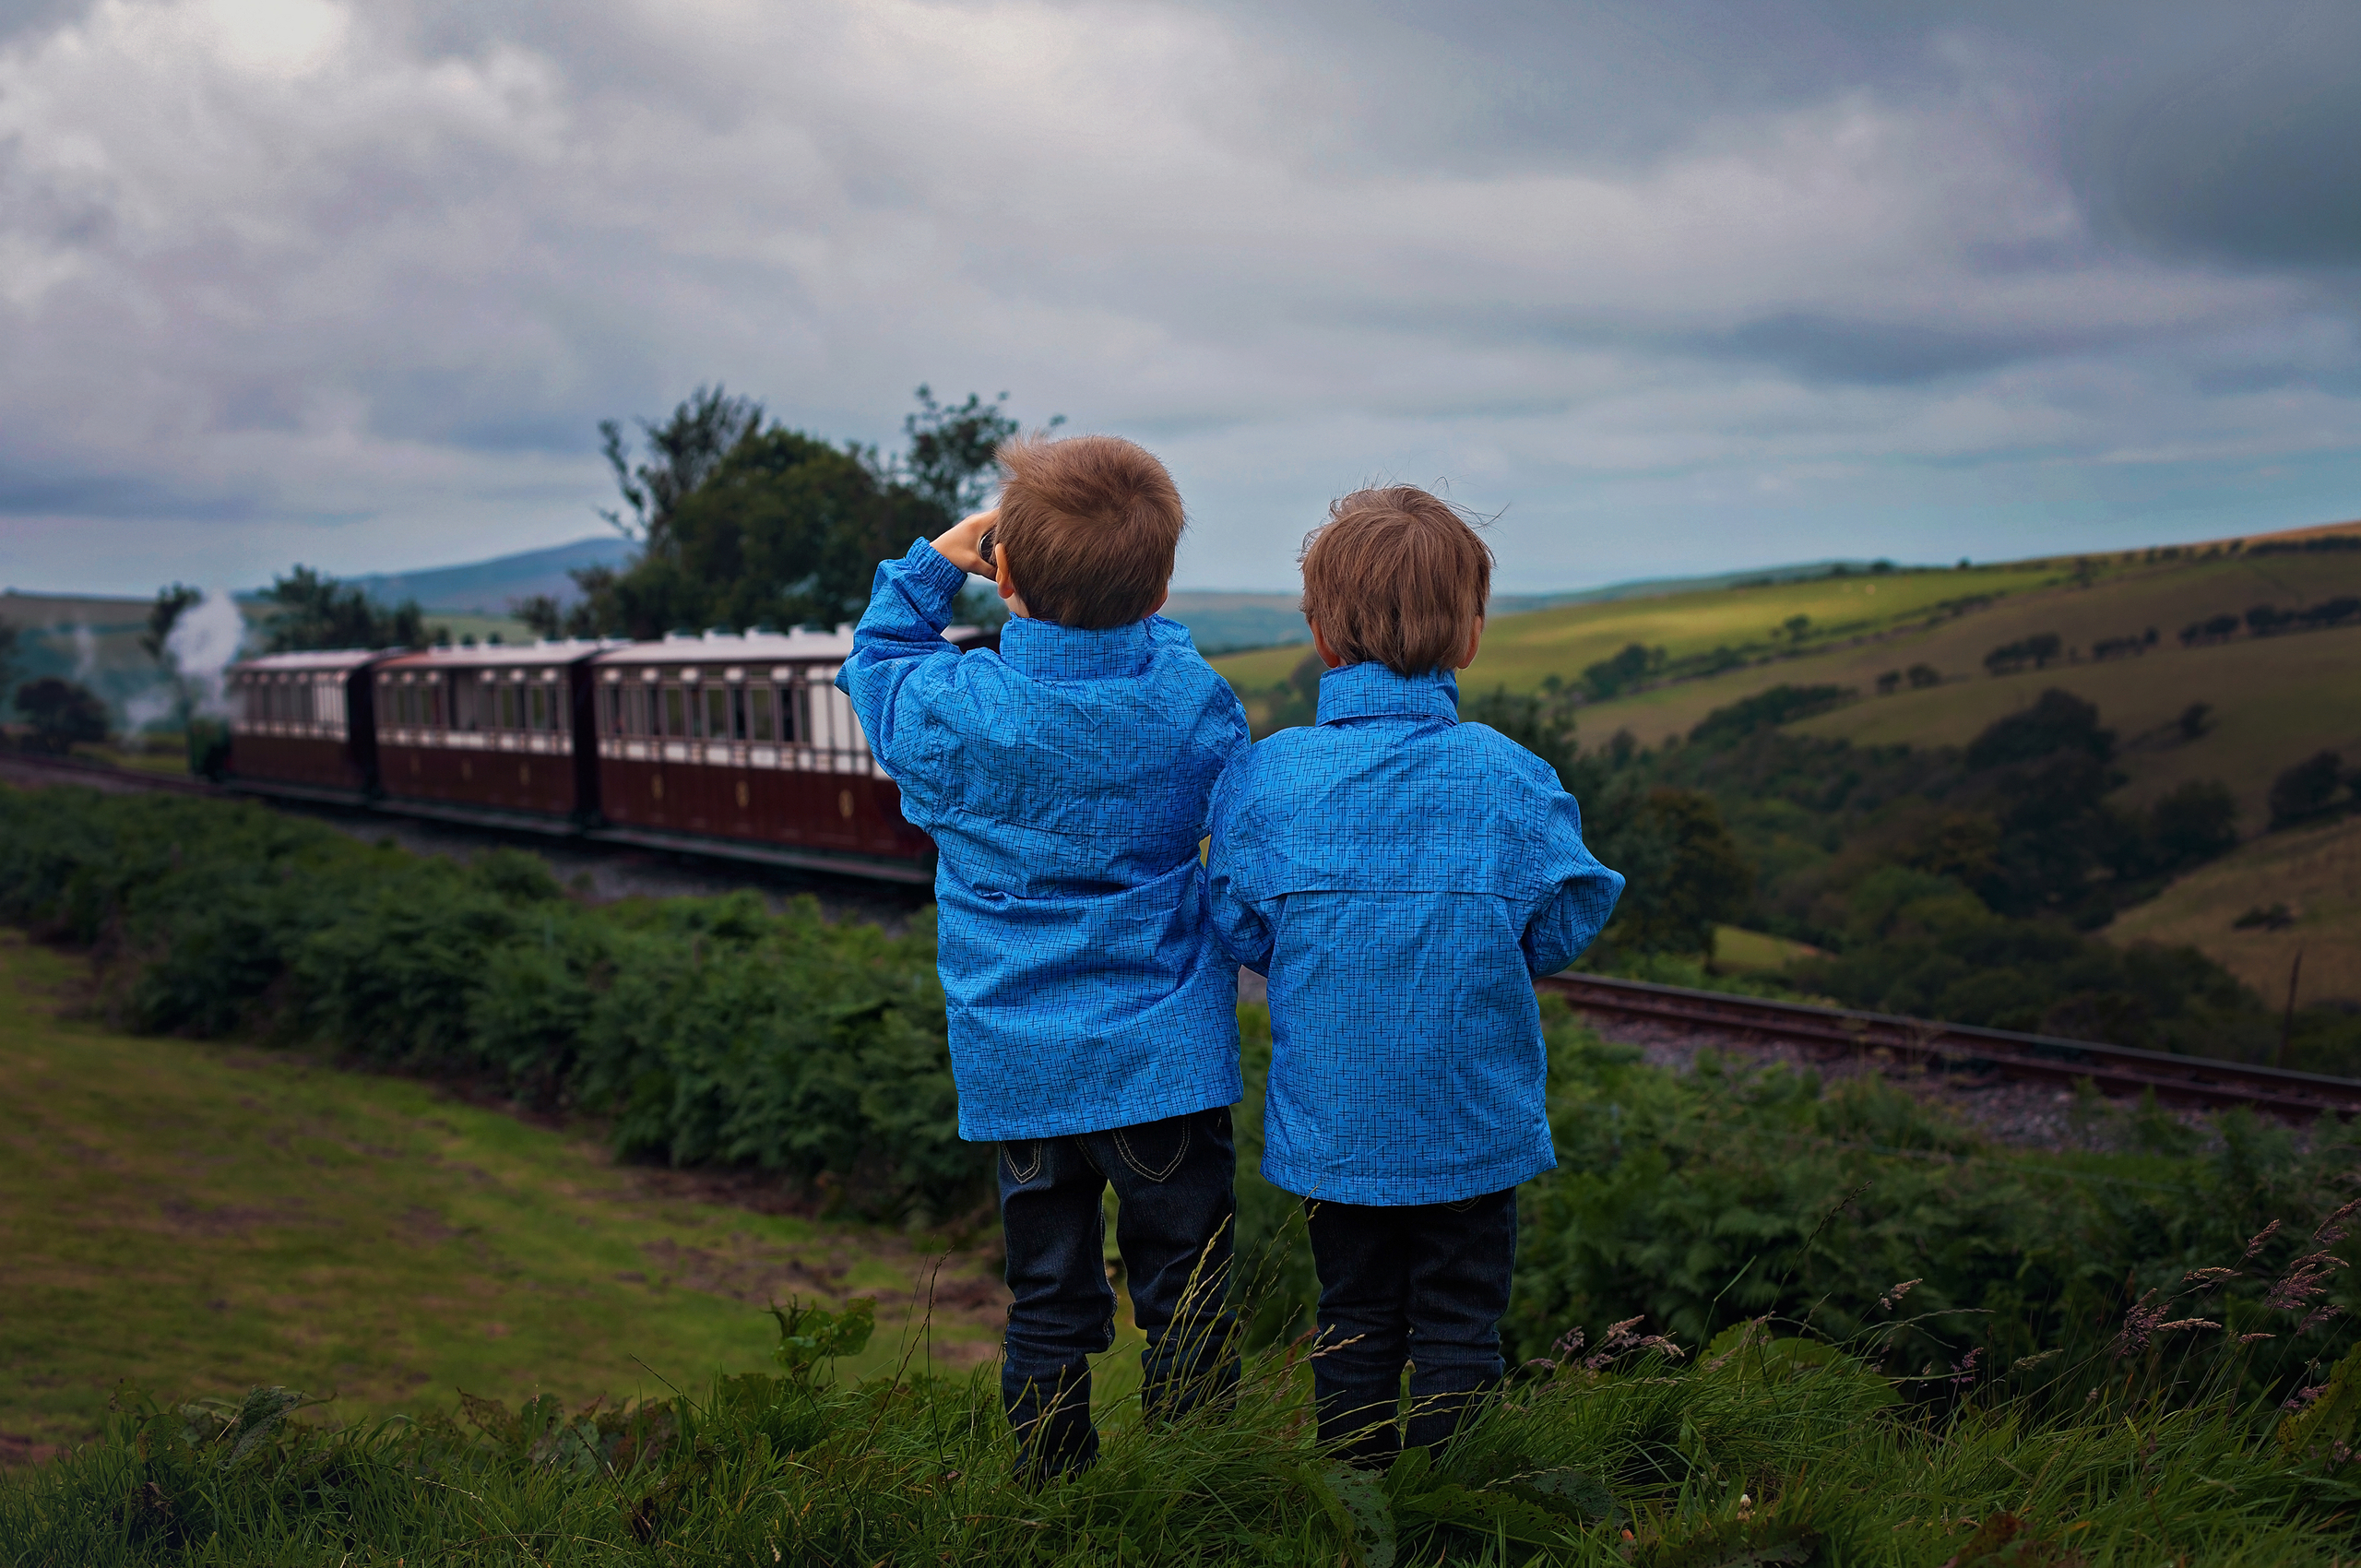 Two young boys look at a steam train on a railway